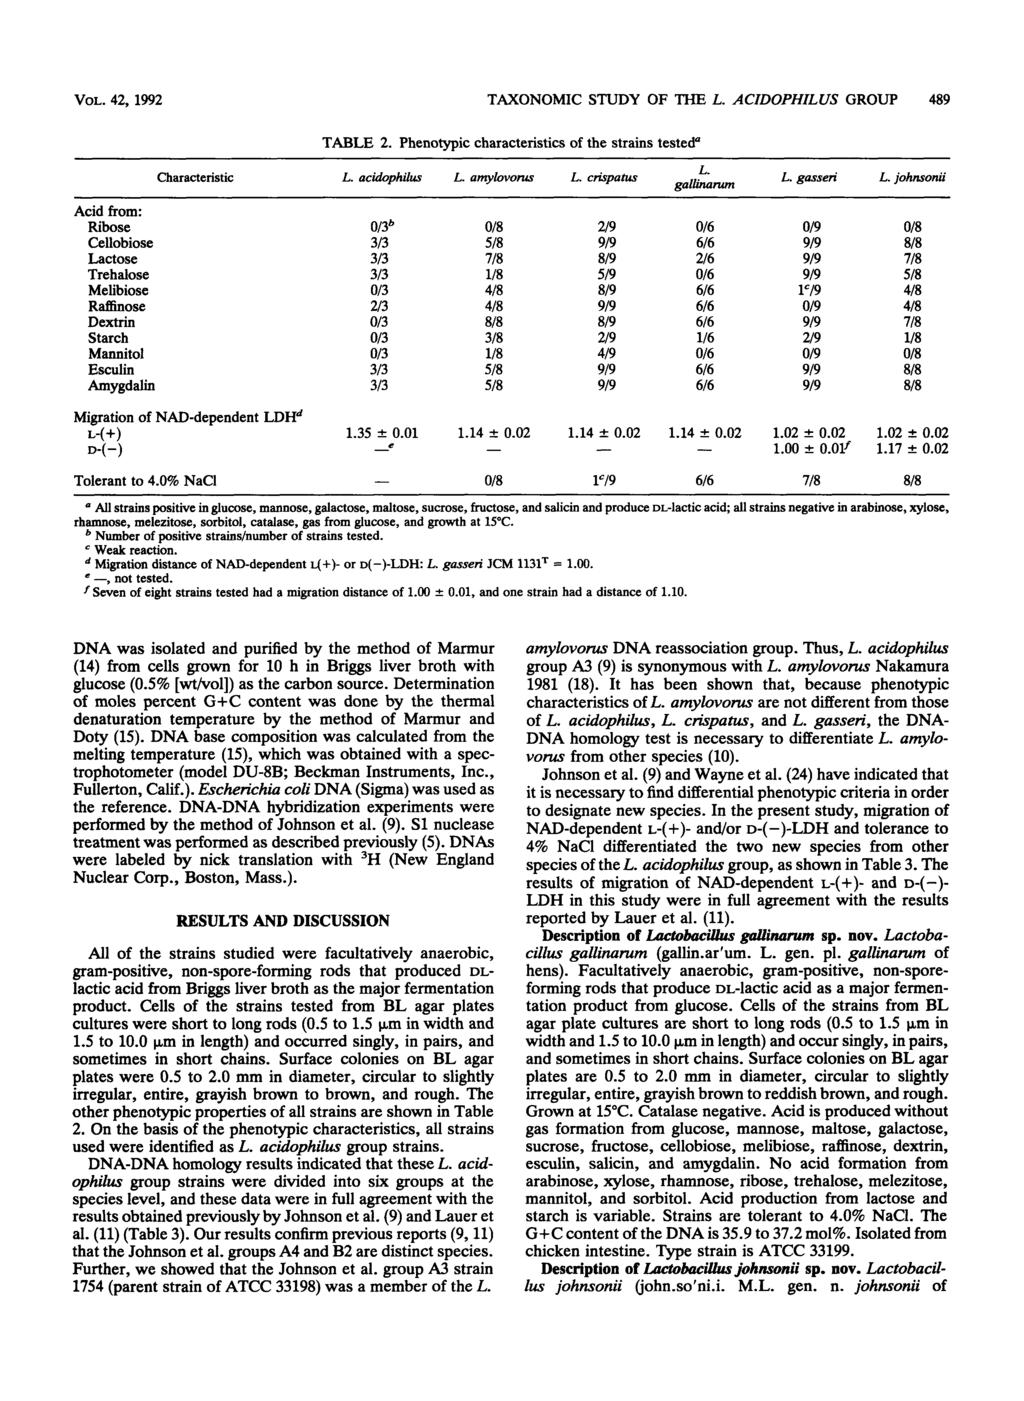 VOL. 42, 1992 TAXONOMIC STUDY OF THE L. ACIDOPHILUS GROUP 489 Acid from: Ribose Cellobiose Lactose Trehalose Melibiose RafEnose Dextrin Starch Mannitol Esculin Amygdalin TABLE 2.